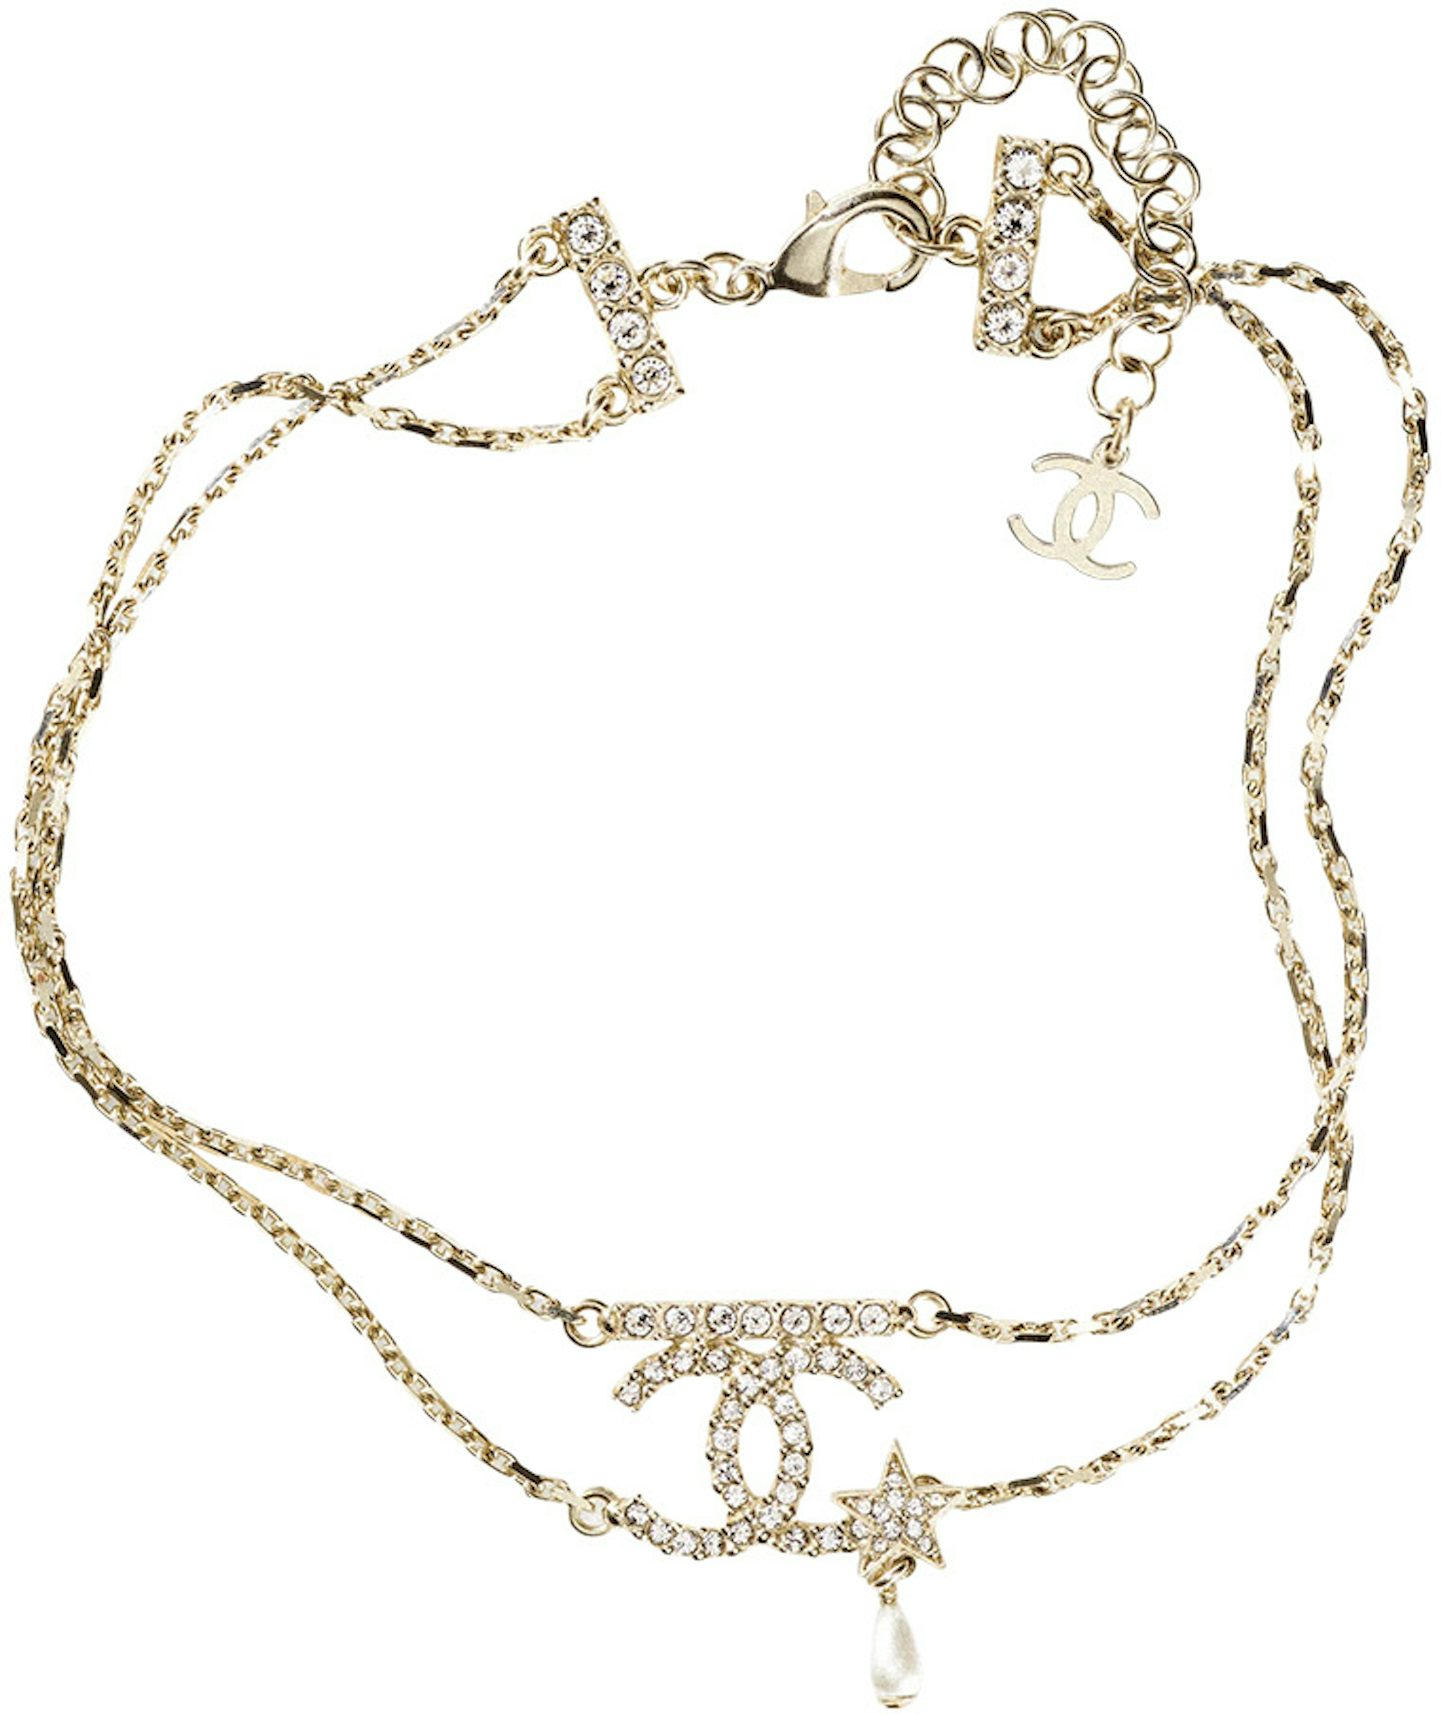 Chanel Choker Necklace AB8050 Gold/White in Gold Metal/Glass Pearl